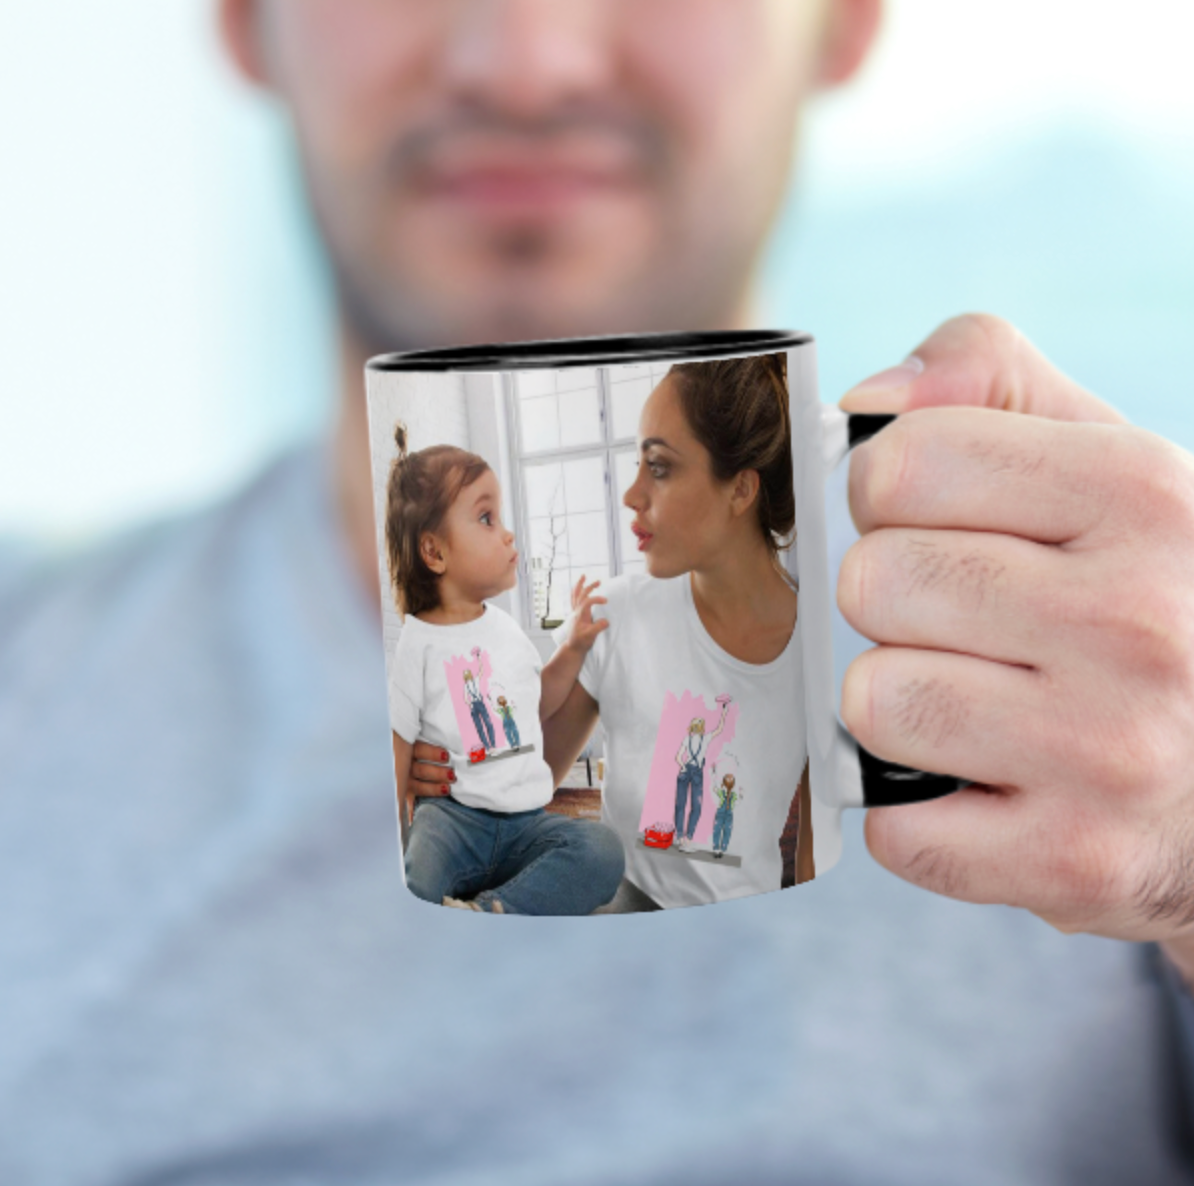 Custom Personalised Photo Coloured Mug Black (Double sided different photos) - Made in USA, Free Fast Shipping